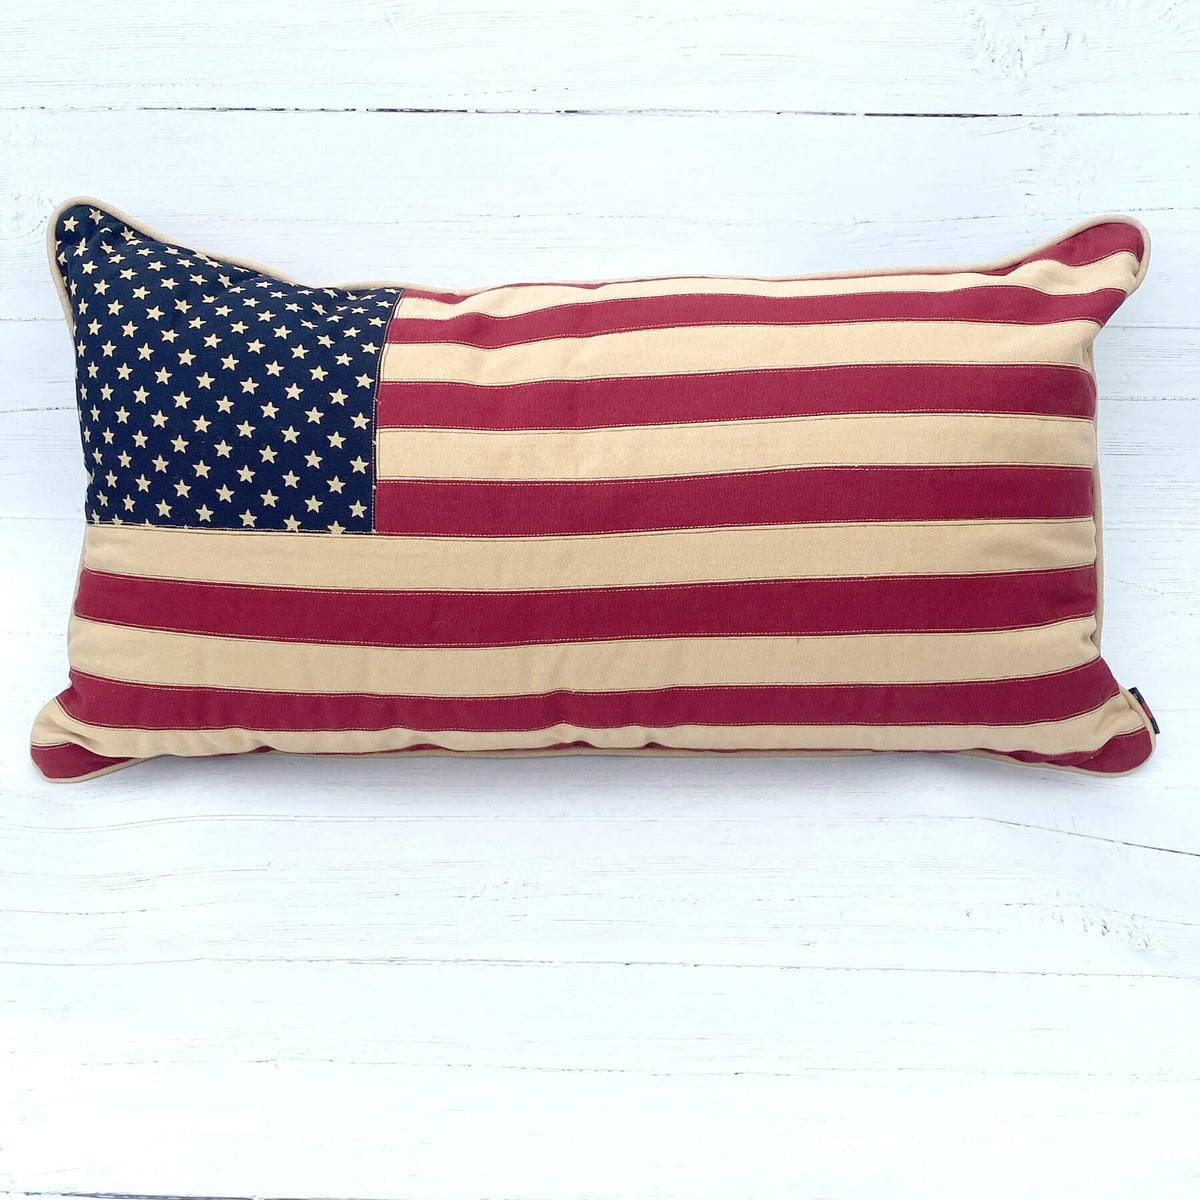 Buy Large Vintage Glory American Flag Cushion in Southend at Under the Sun shop